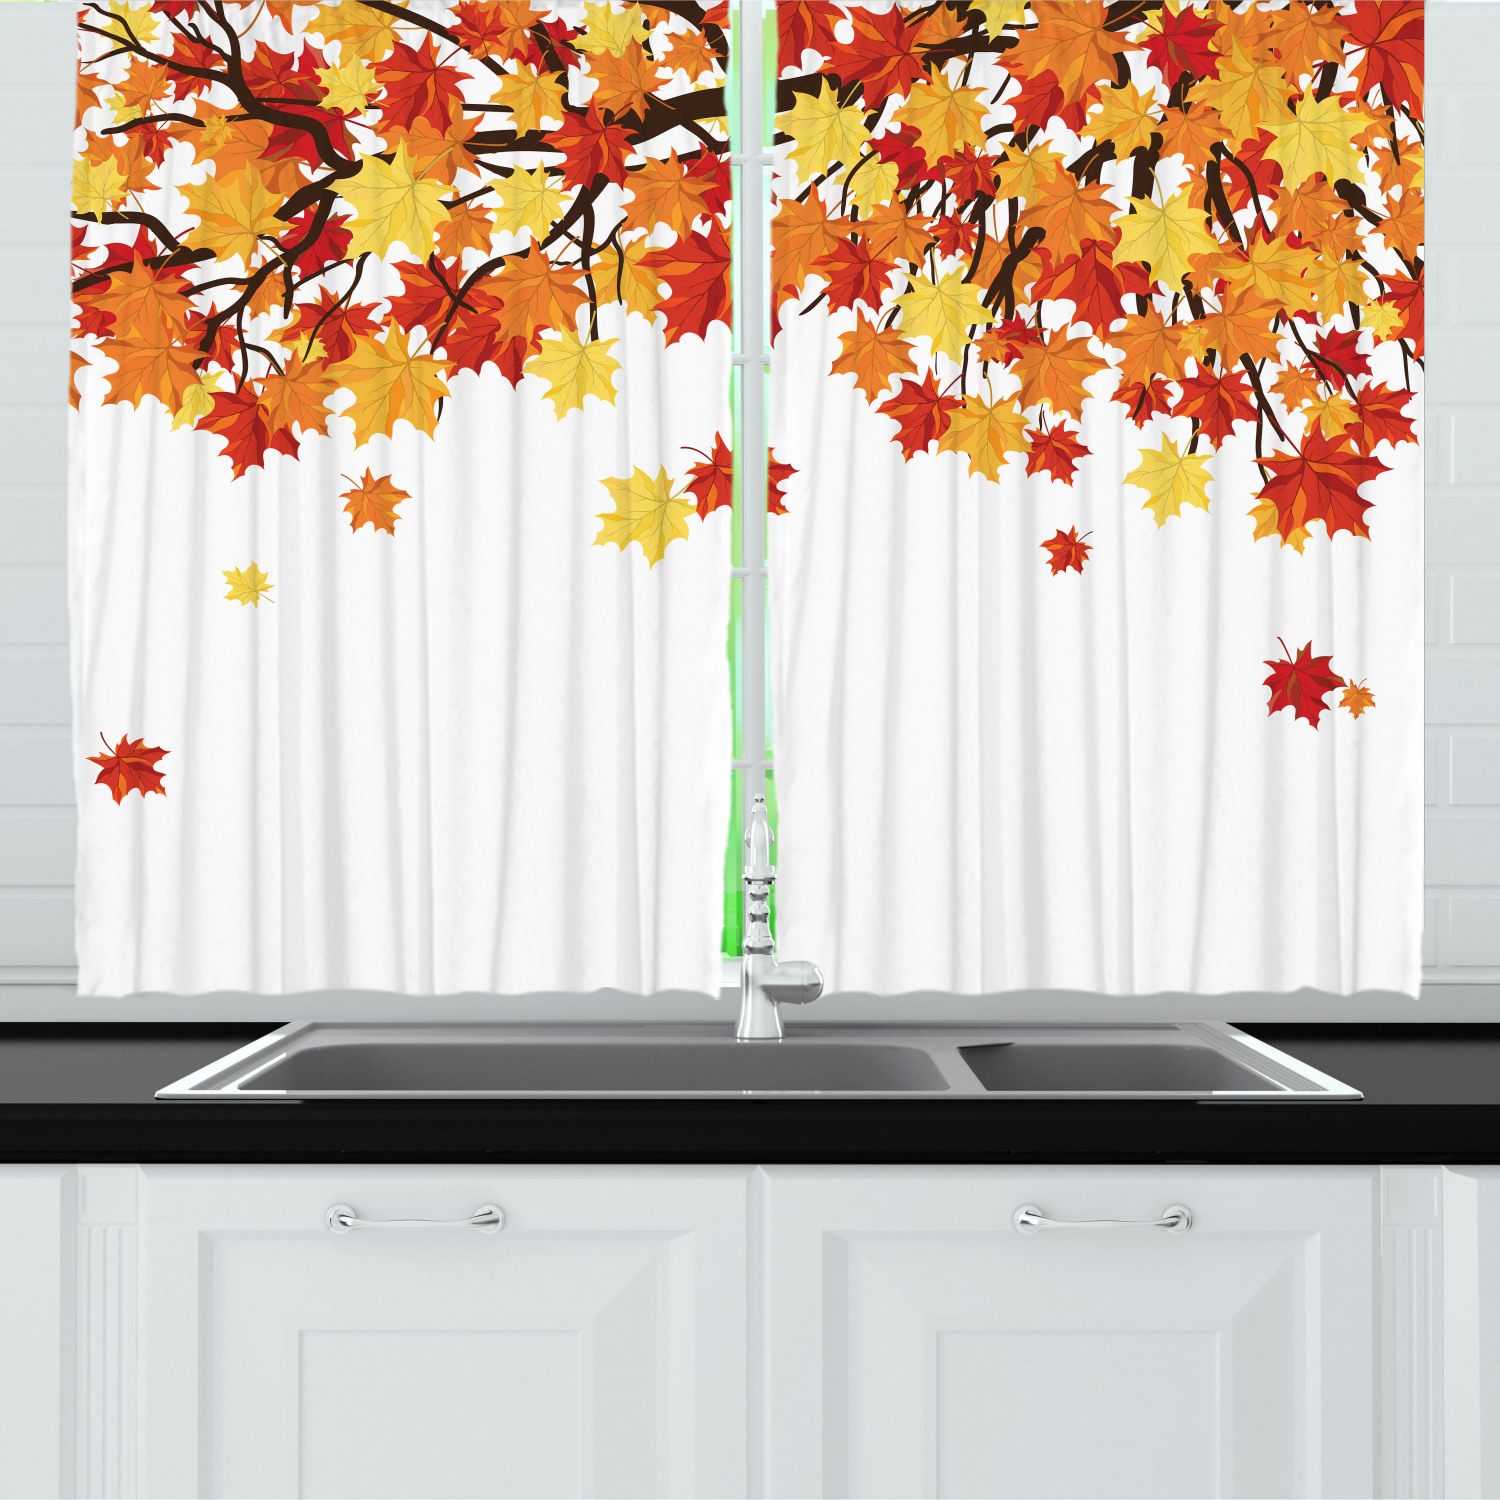 Colorful Tree Window Treatments for Kitchen Curtains 2 Panels 55X39 Inches 